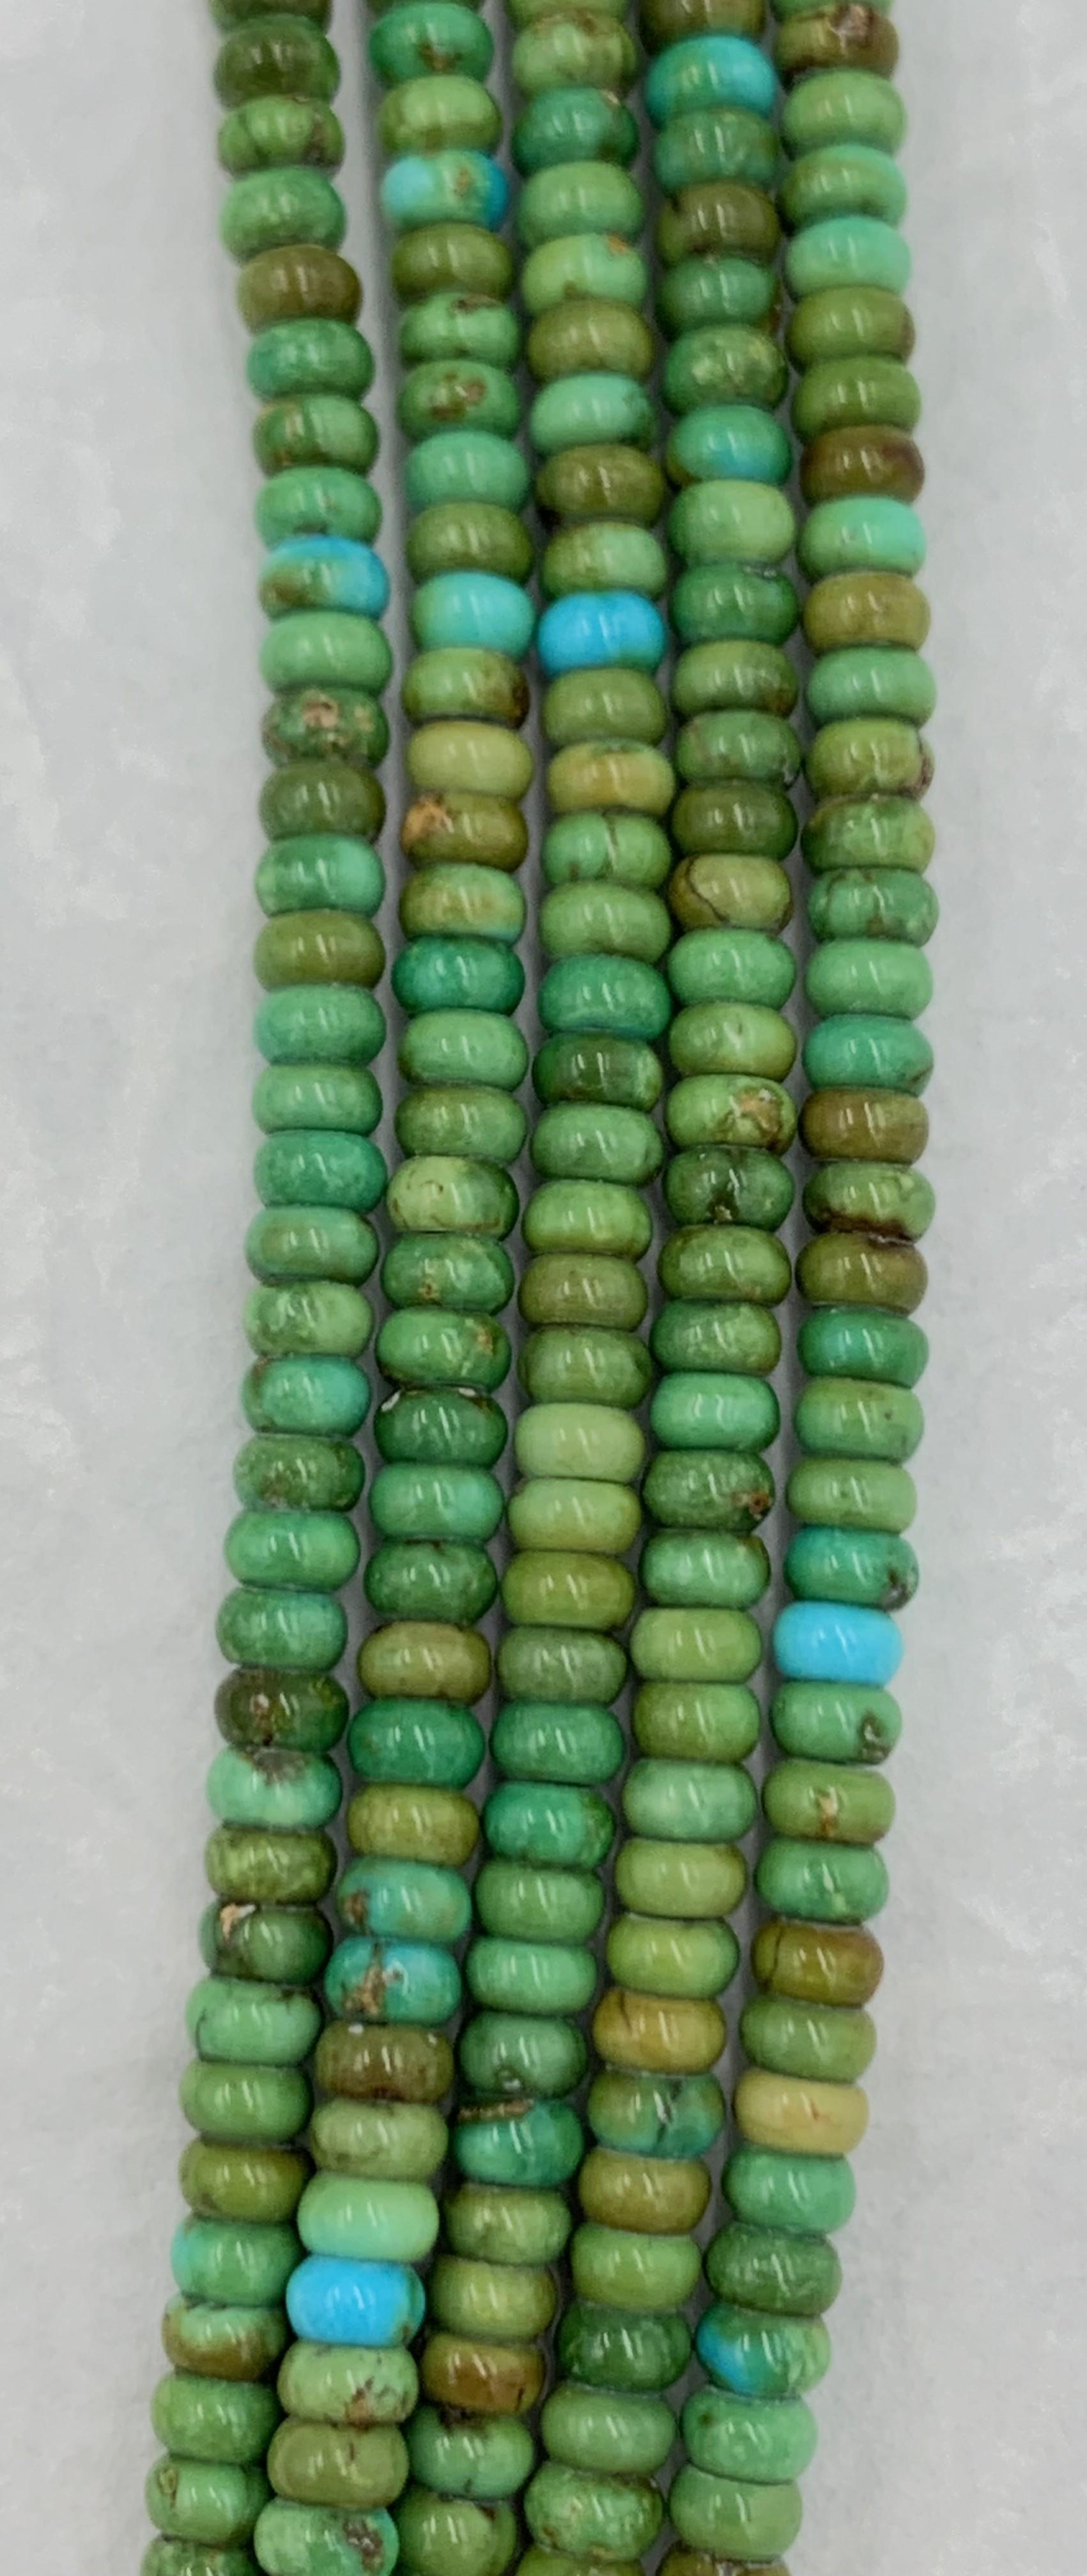 Contemporary Heishi style Sonoran Gold turquoise beads necklace with five strands. The necklace has silver cones at both ends. 

Sonoran Gold Turquoise is mined in Sonora, Mexico near the city of Cananea. The mine is located at the Campitos Mountain